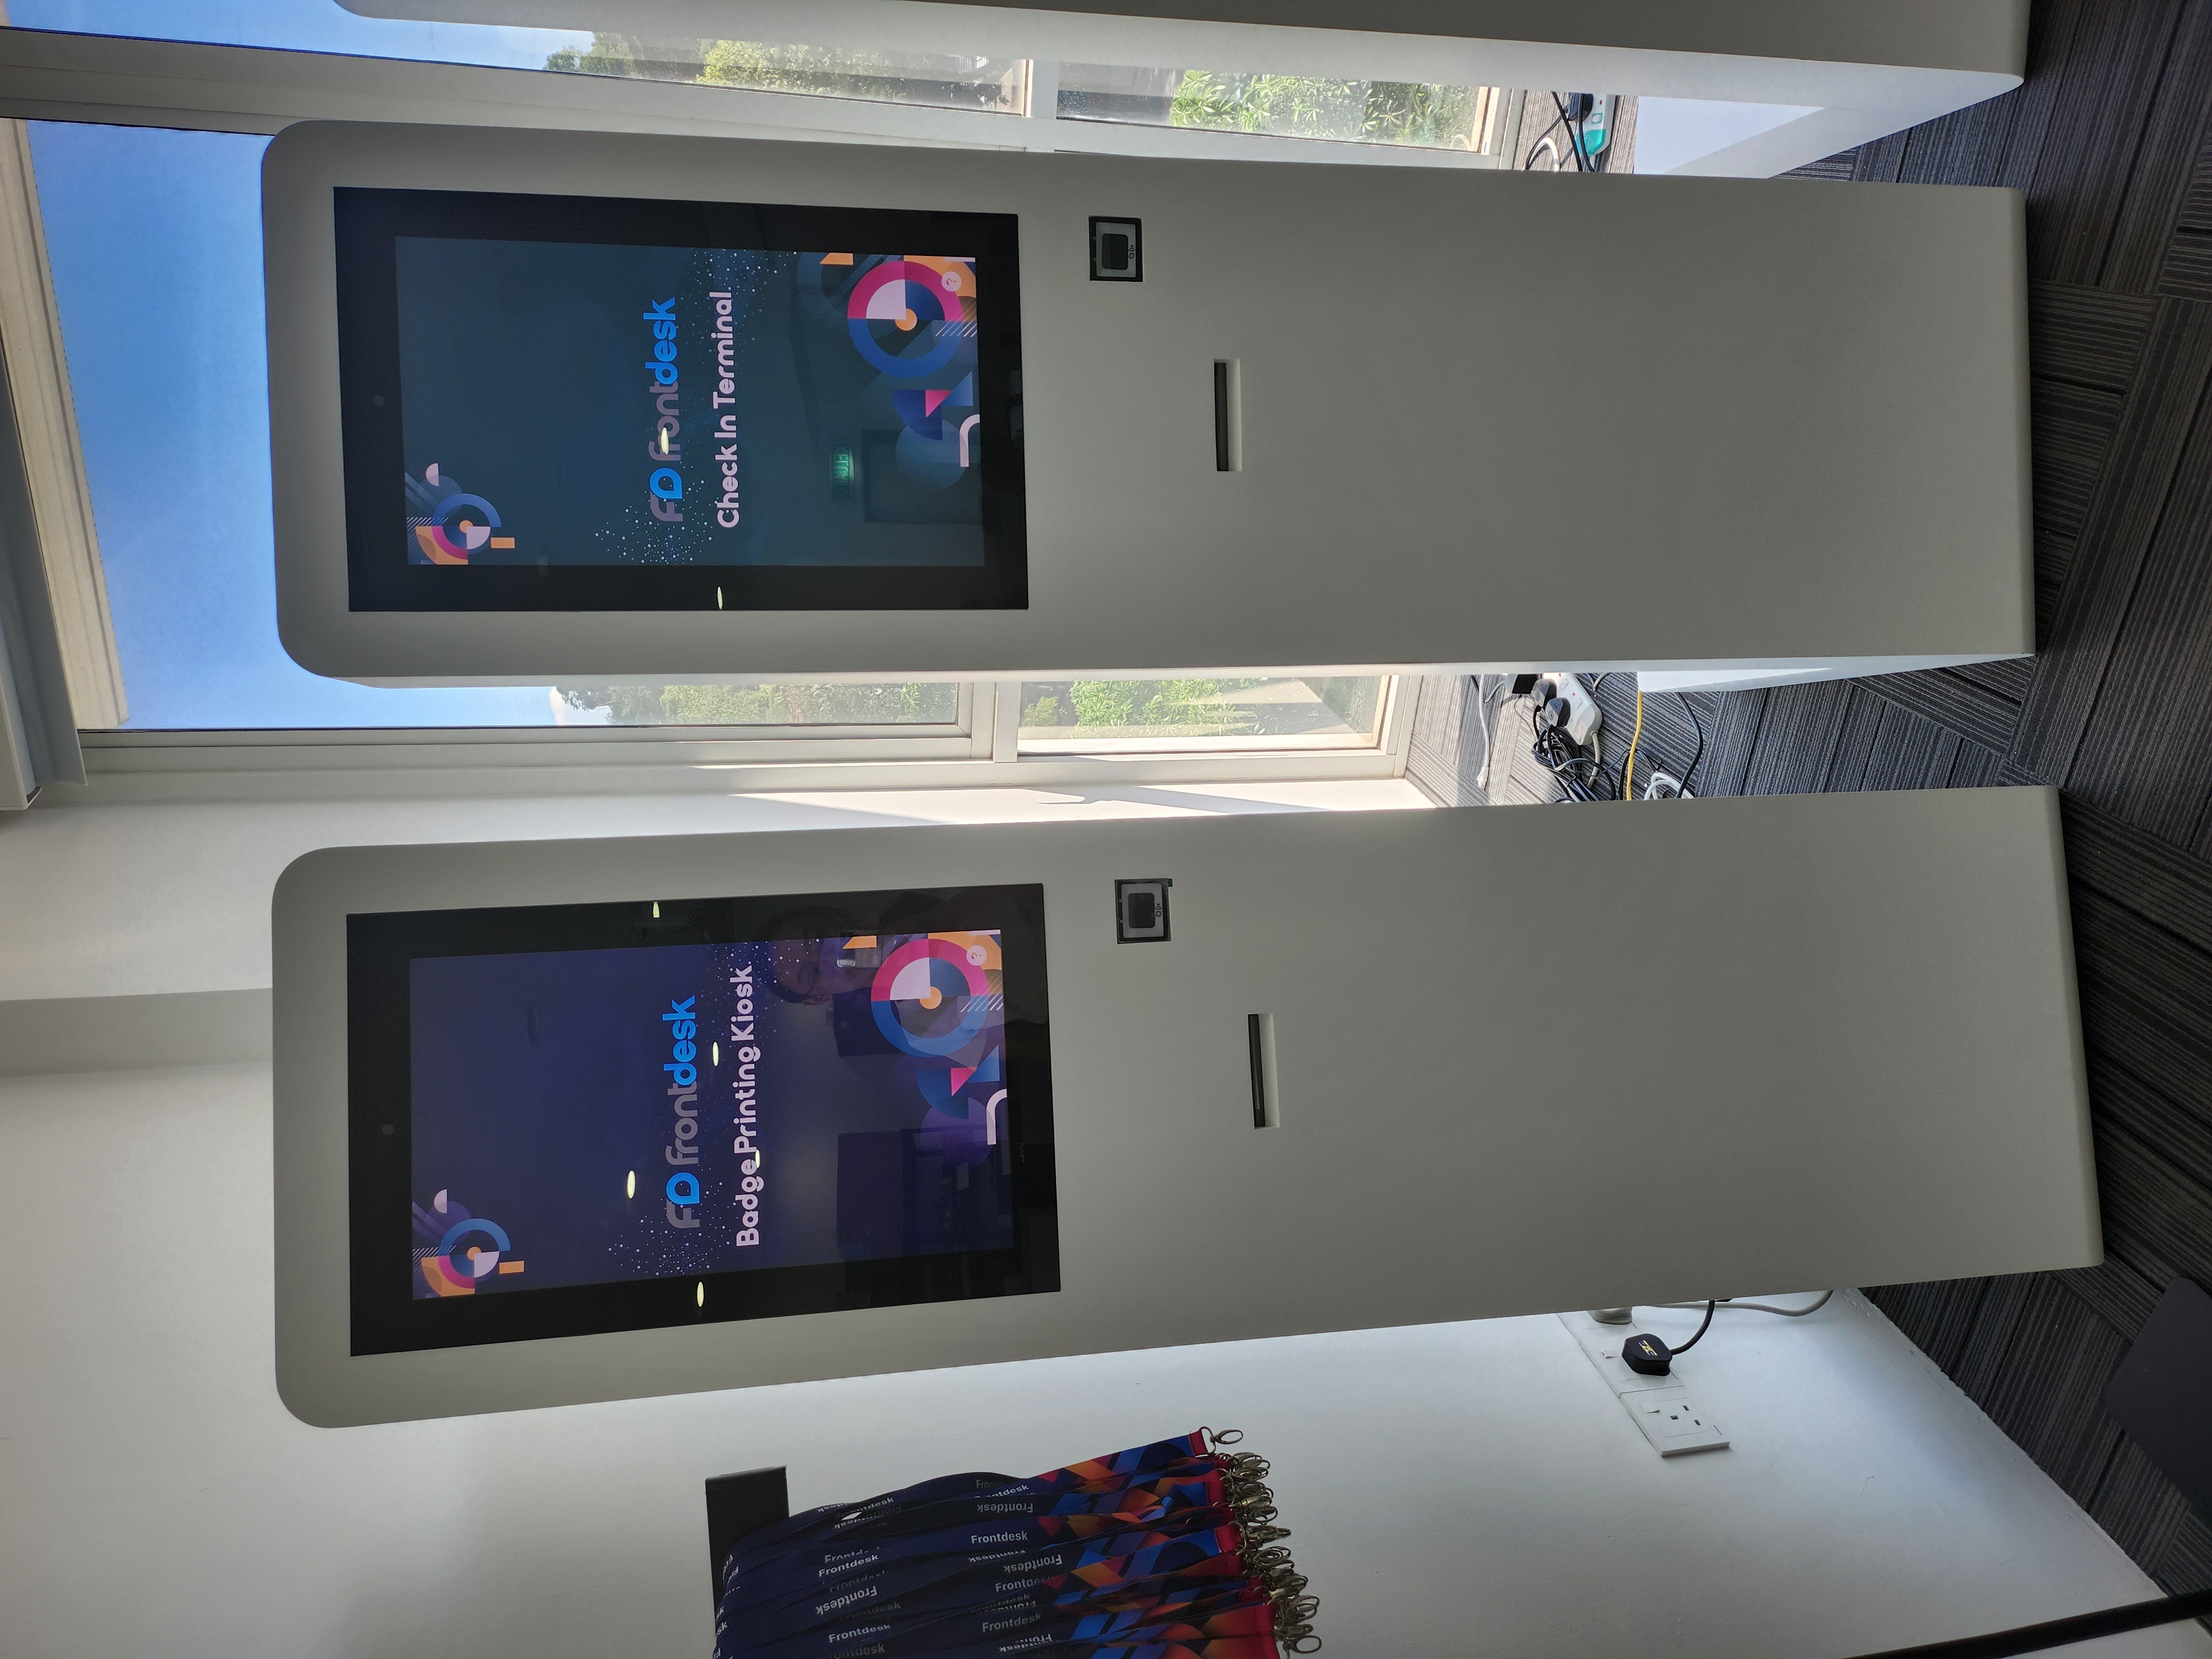 The image showcases our interactive kiosk designed for immersive engagement through captivating games. Users can enjoy a wide range of interactive and entertaining games directly on the kiosk.